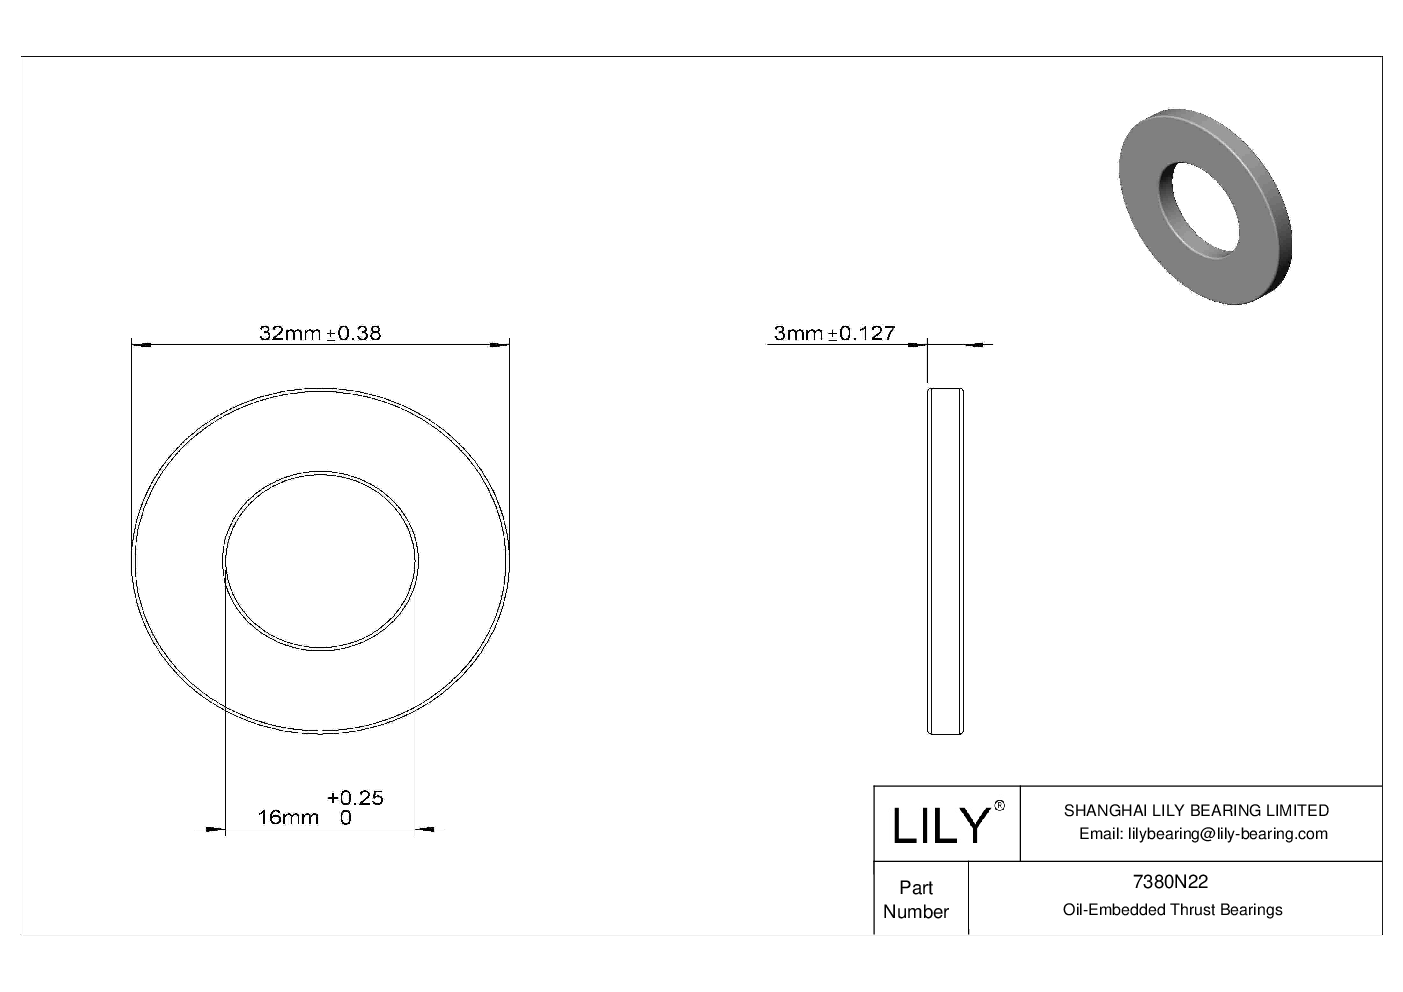 HDIANCC High-Load Ultra-Low-Friction Oil-Embedded Thrust Bearings cad drawing